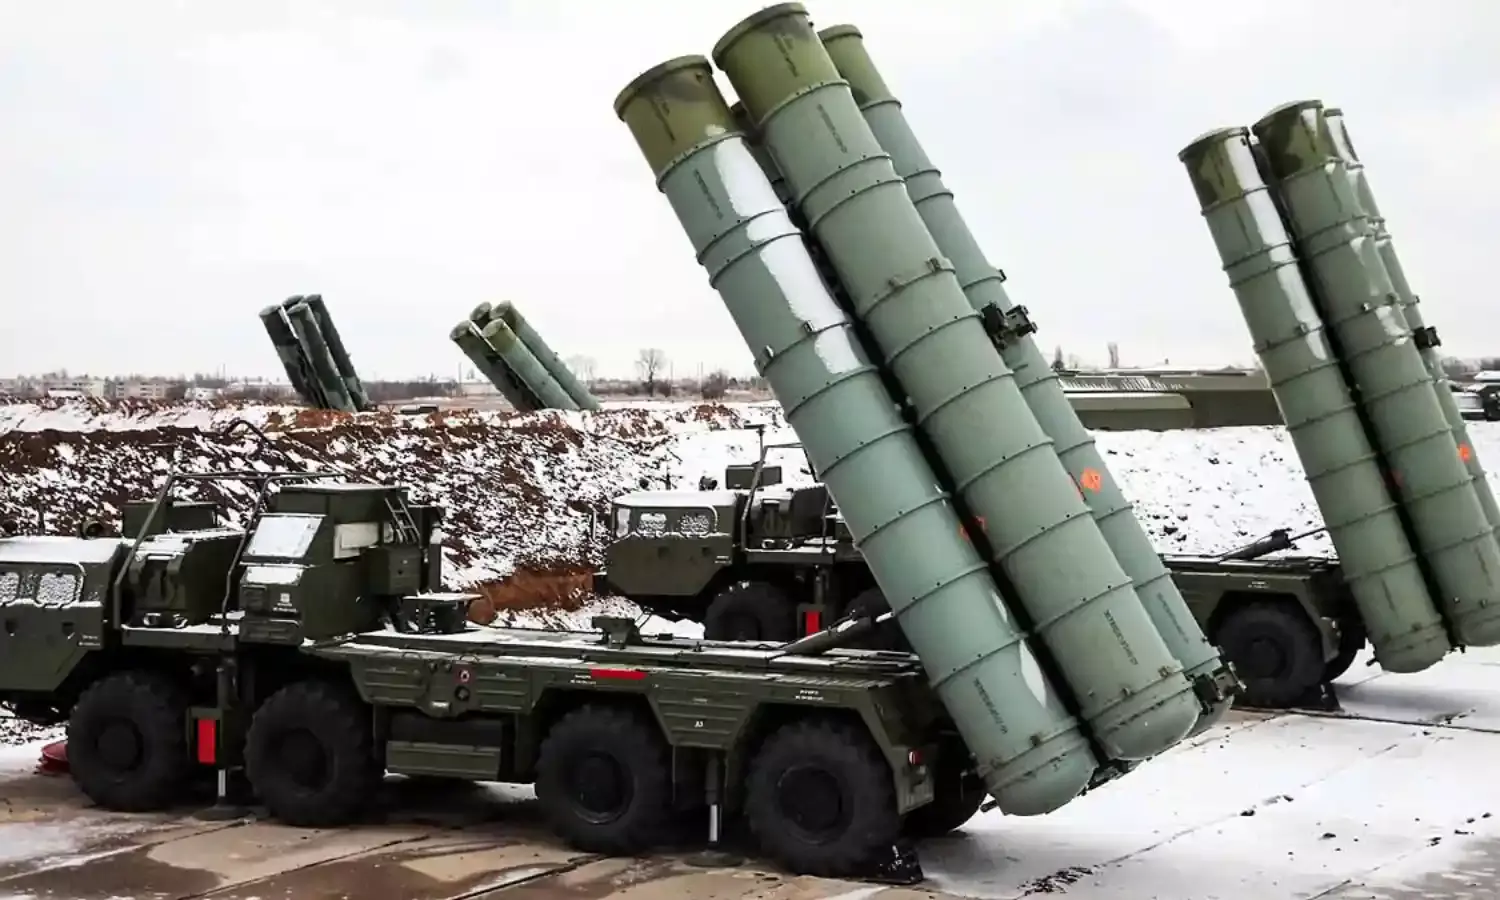 America lifts sanctions on India from purchase of Russian S-400 missile systems